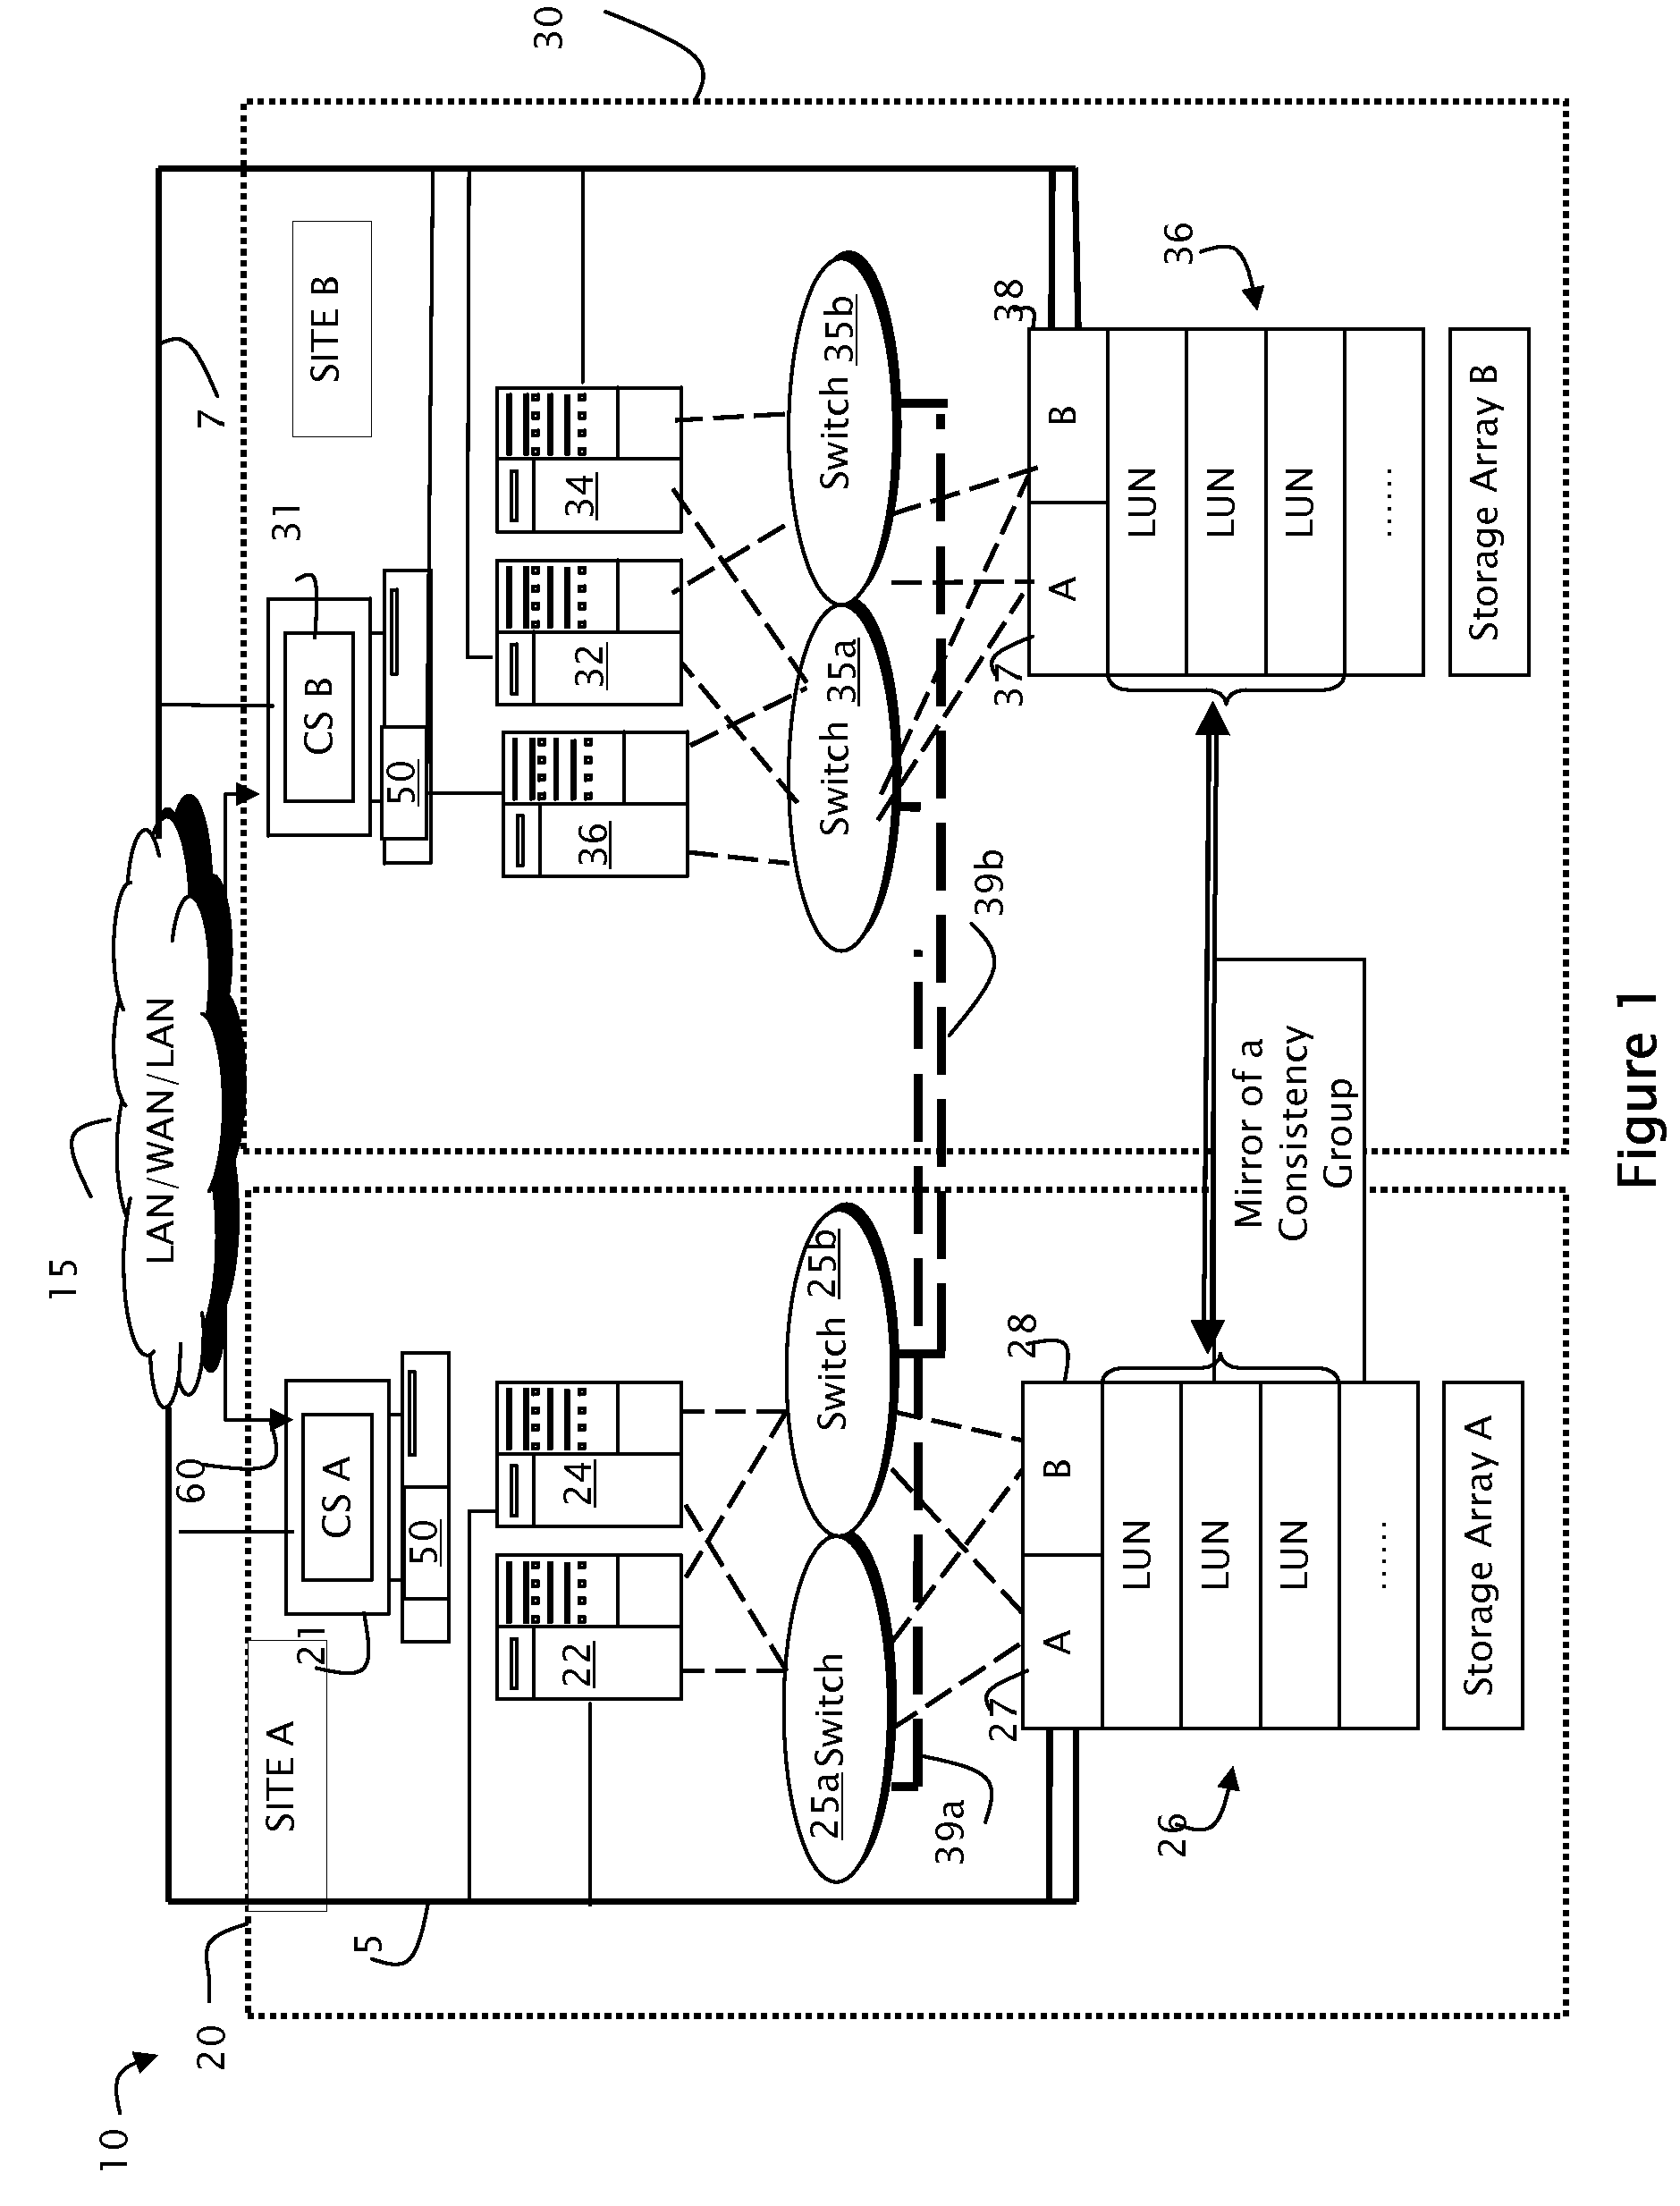 System and method for initializing a network attached storage system for disaster recovery